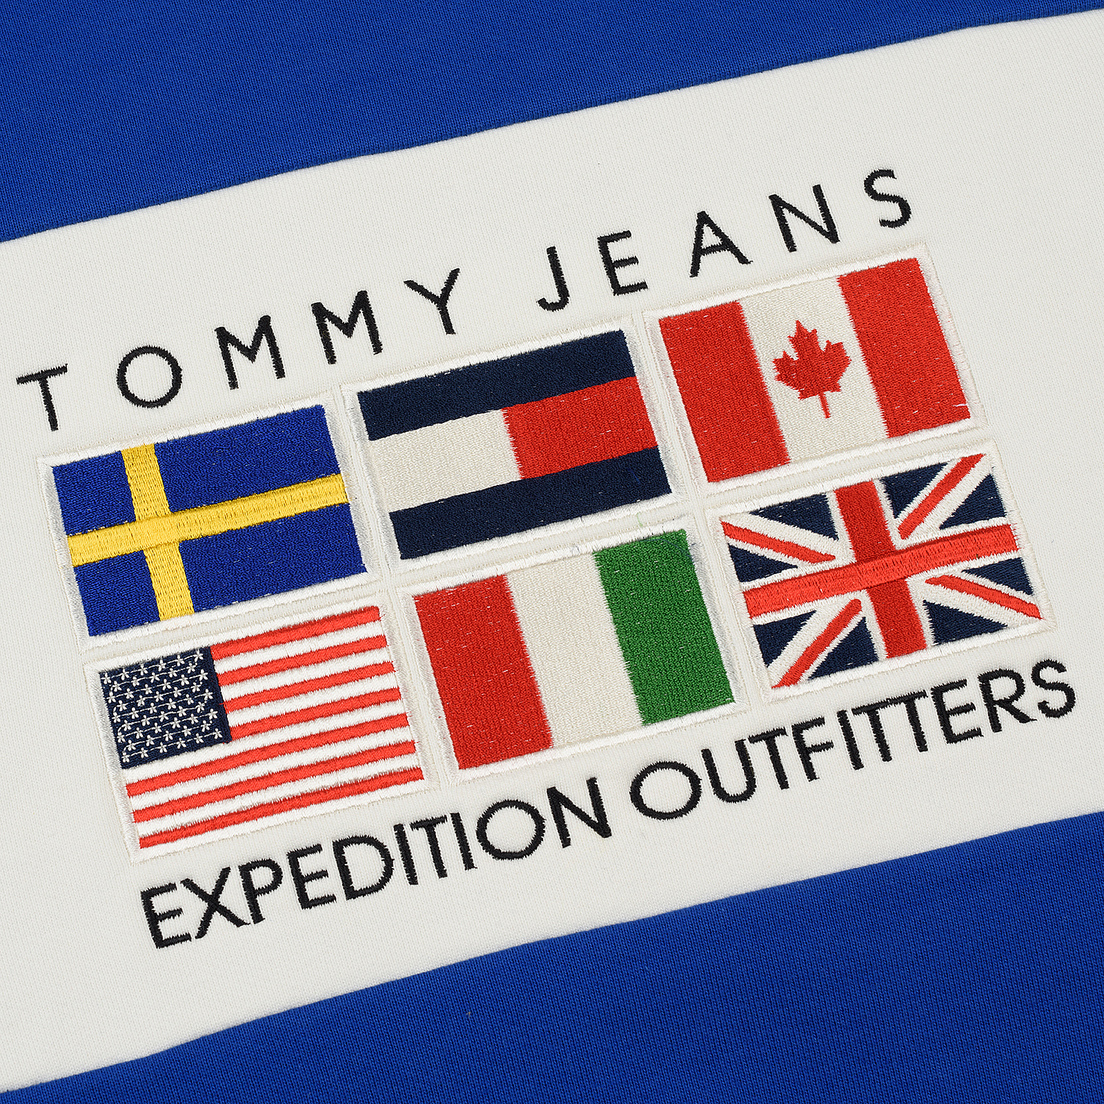 Tommy Jeans Женская толстовка Crew Neck Expedition 6.0